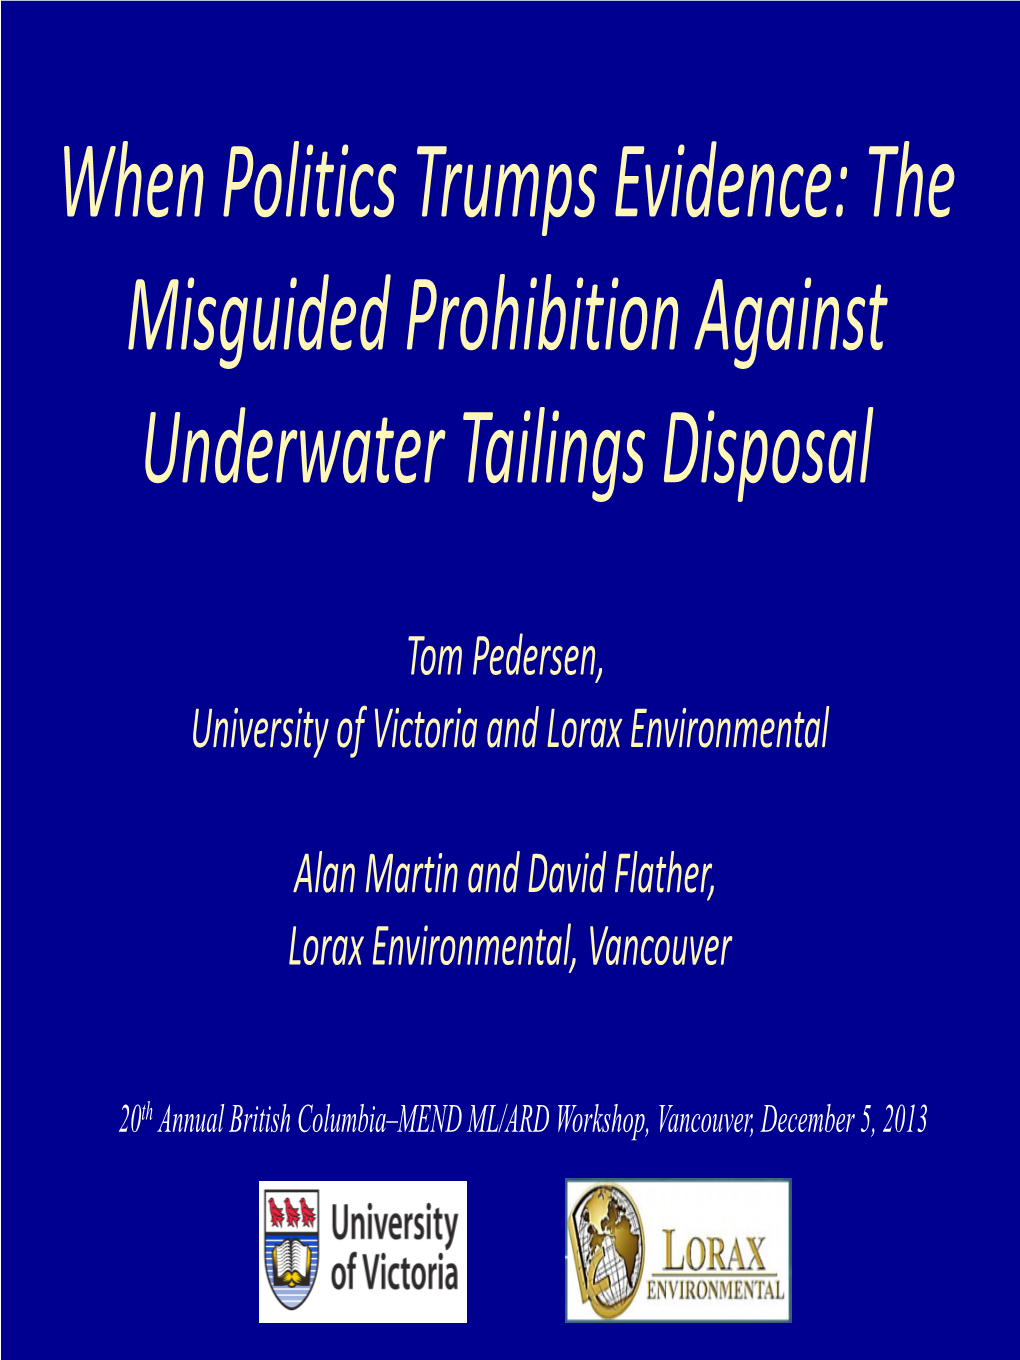 When Politics Trumps Evidence: the Misguided Prohibition Against Underwater Tailings Disposal